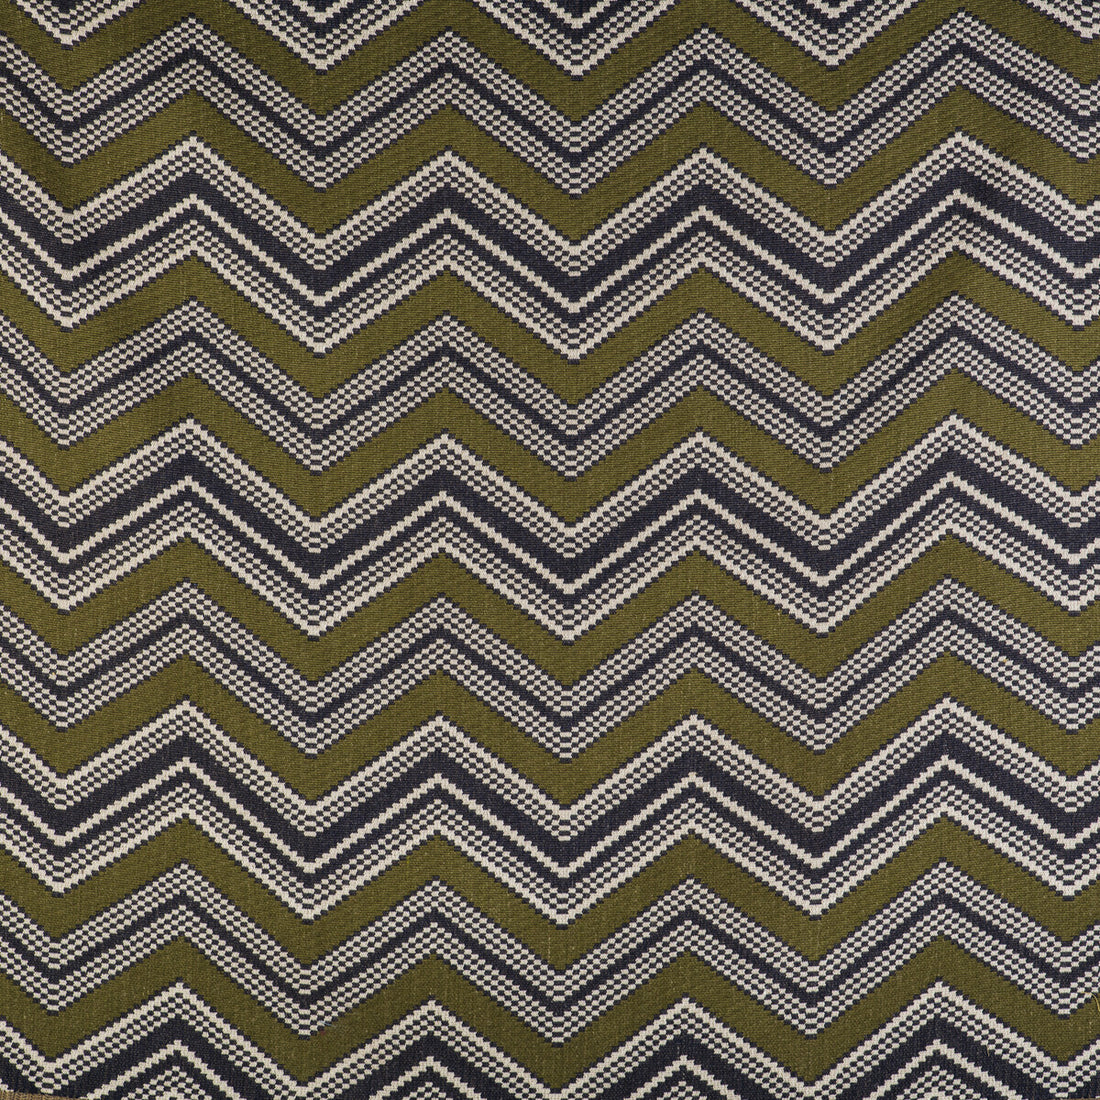 Zig Zag fabric in verde/navy color - pattern GDT5498.001.0 - by Gaston y Daniela in the Gaston Libreria collection